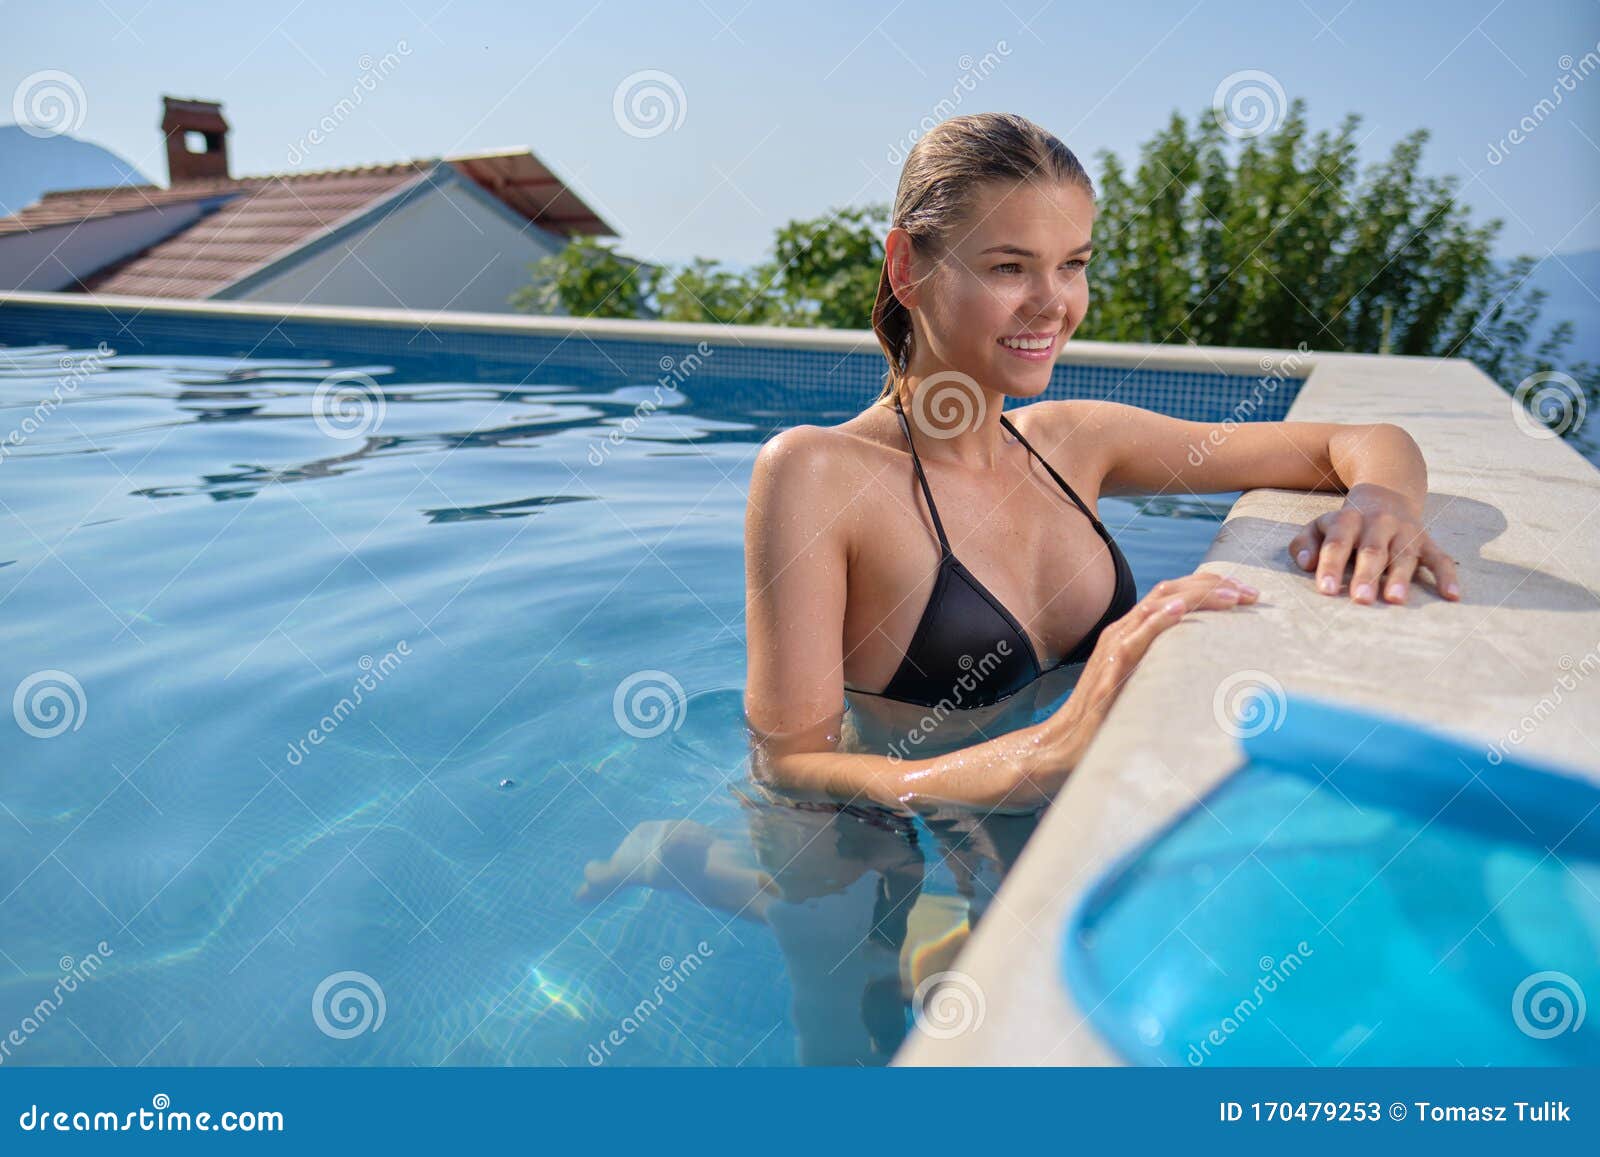 Beautiful Woman With Sexy Body By The Pool Stock Photo, Picture and Royalty  Free Image. Image 54061395.